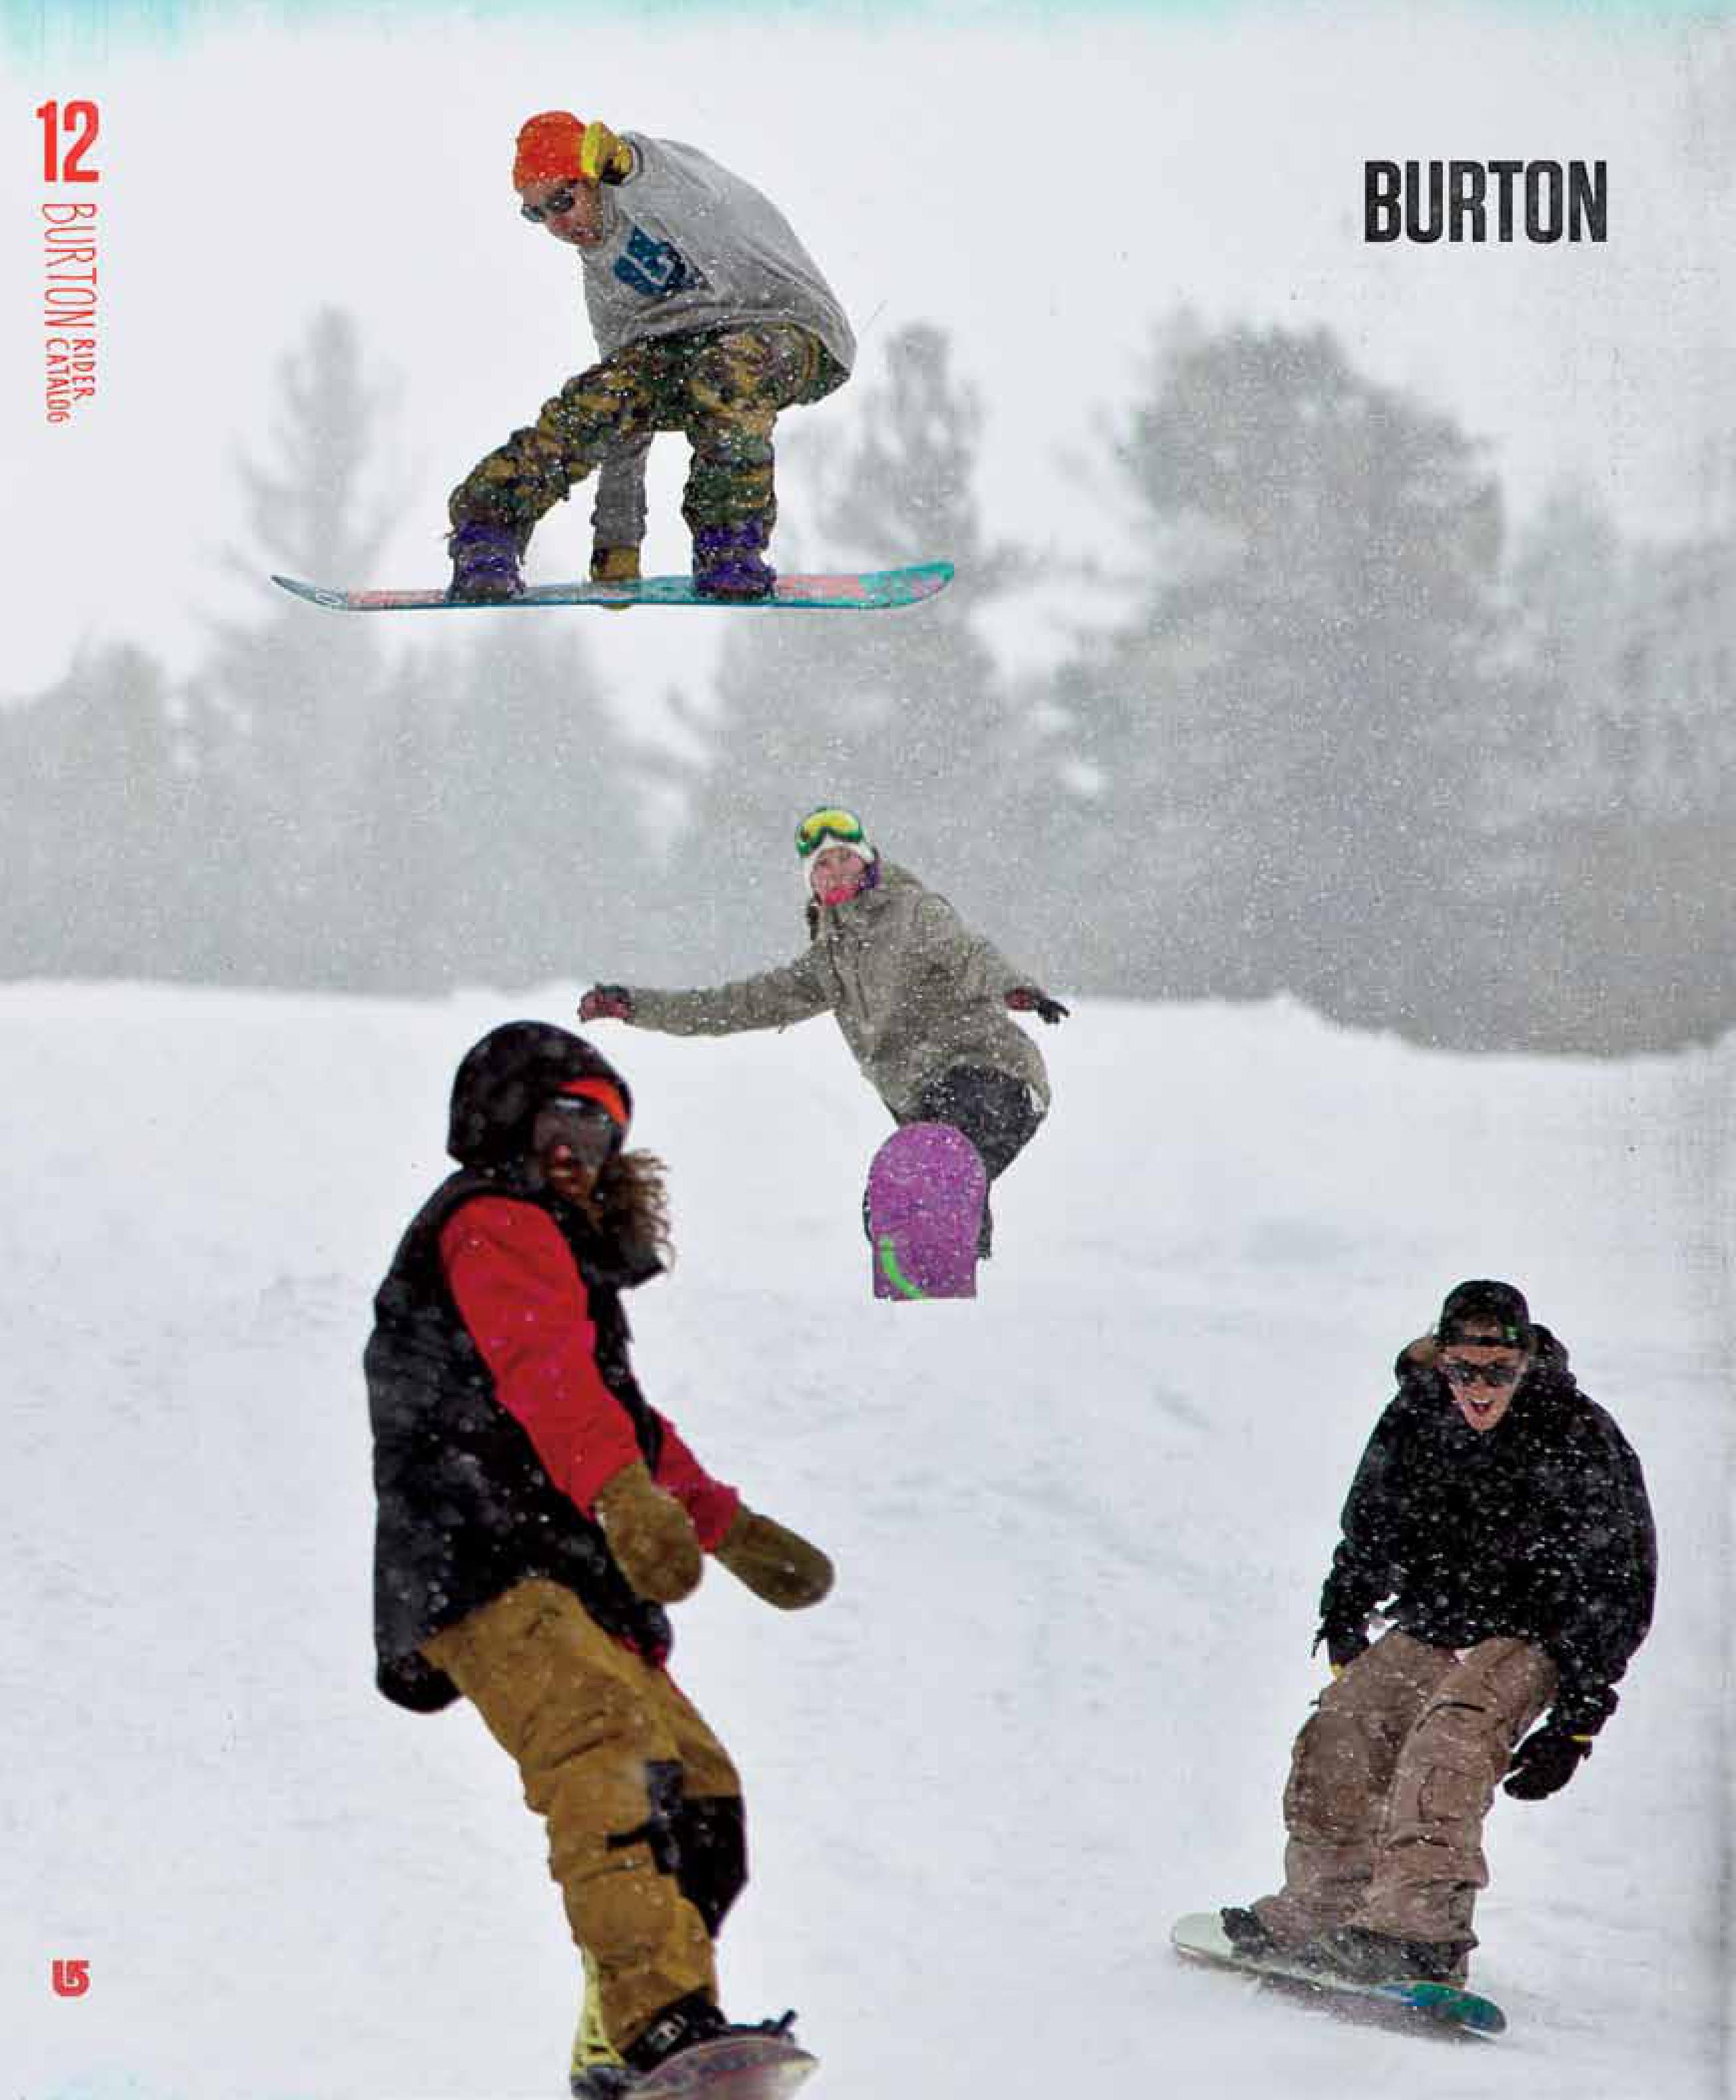 BURTON snowboard 2 sided 2010 RESTRICTED promo poster New Old Stock Mint Cond 